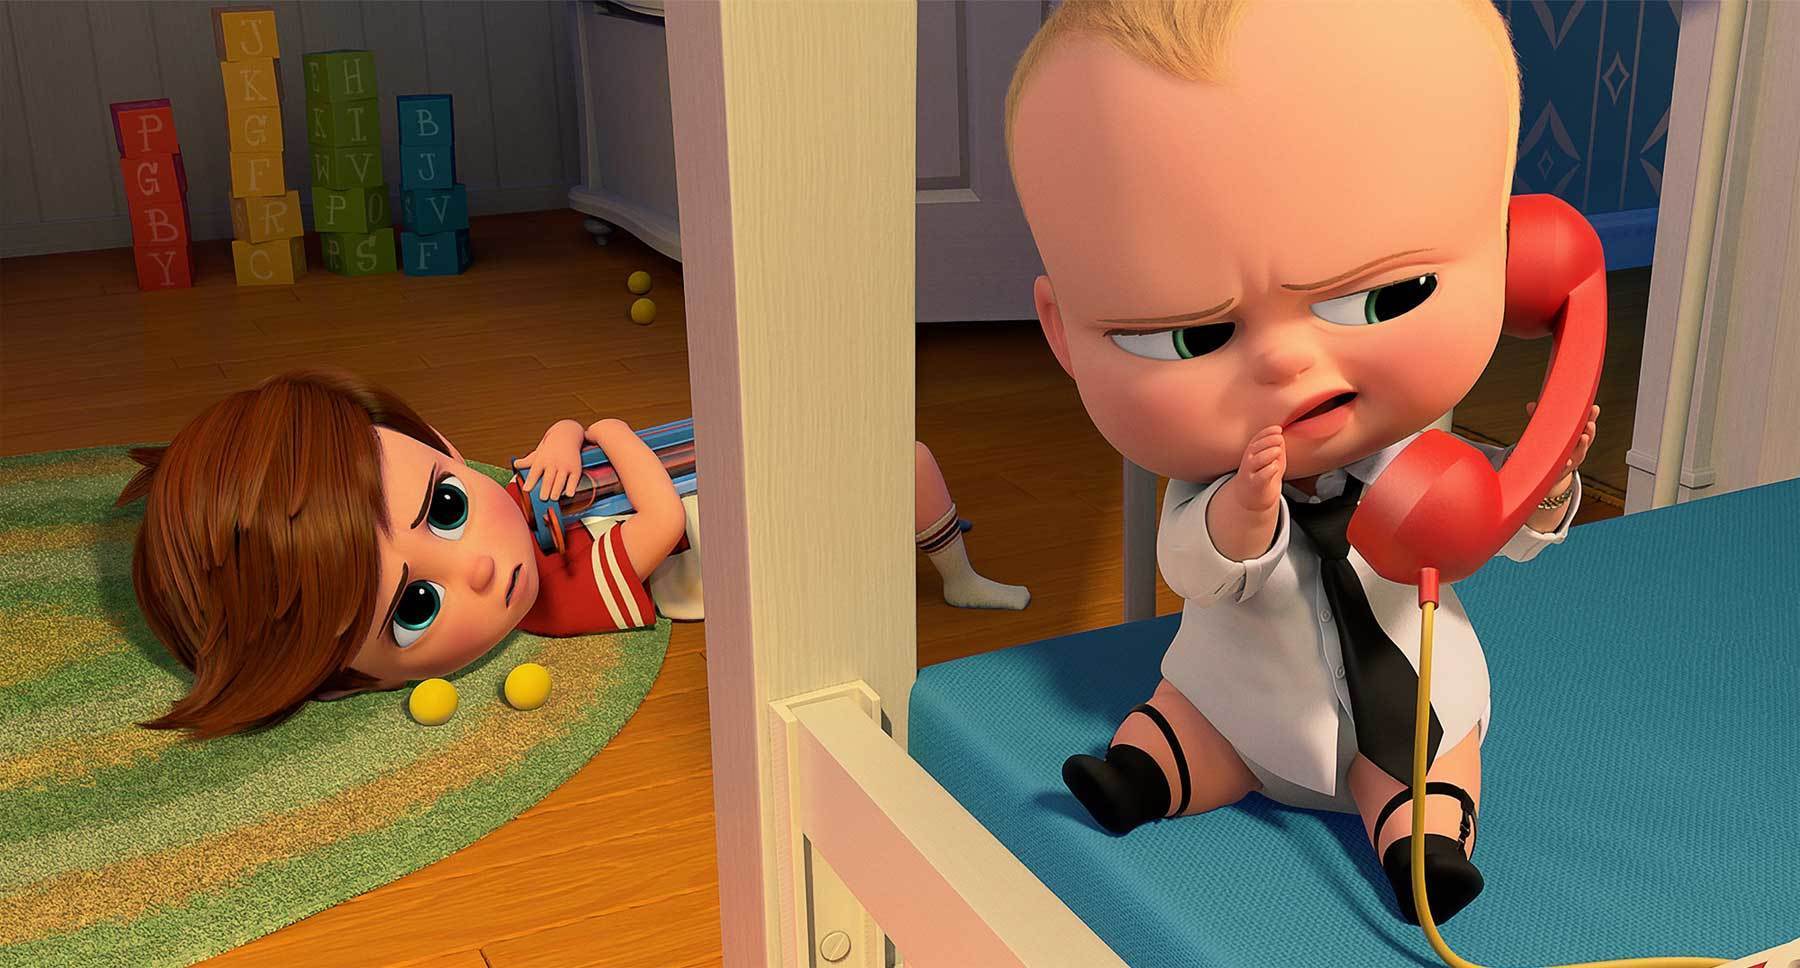 Miles Bakshi (as Tim Templeton) and Alec Baldwin (on the phone as The Boss Baby) in the animated movie "The Boss Baby"